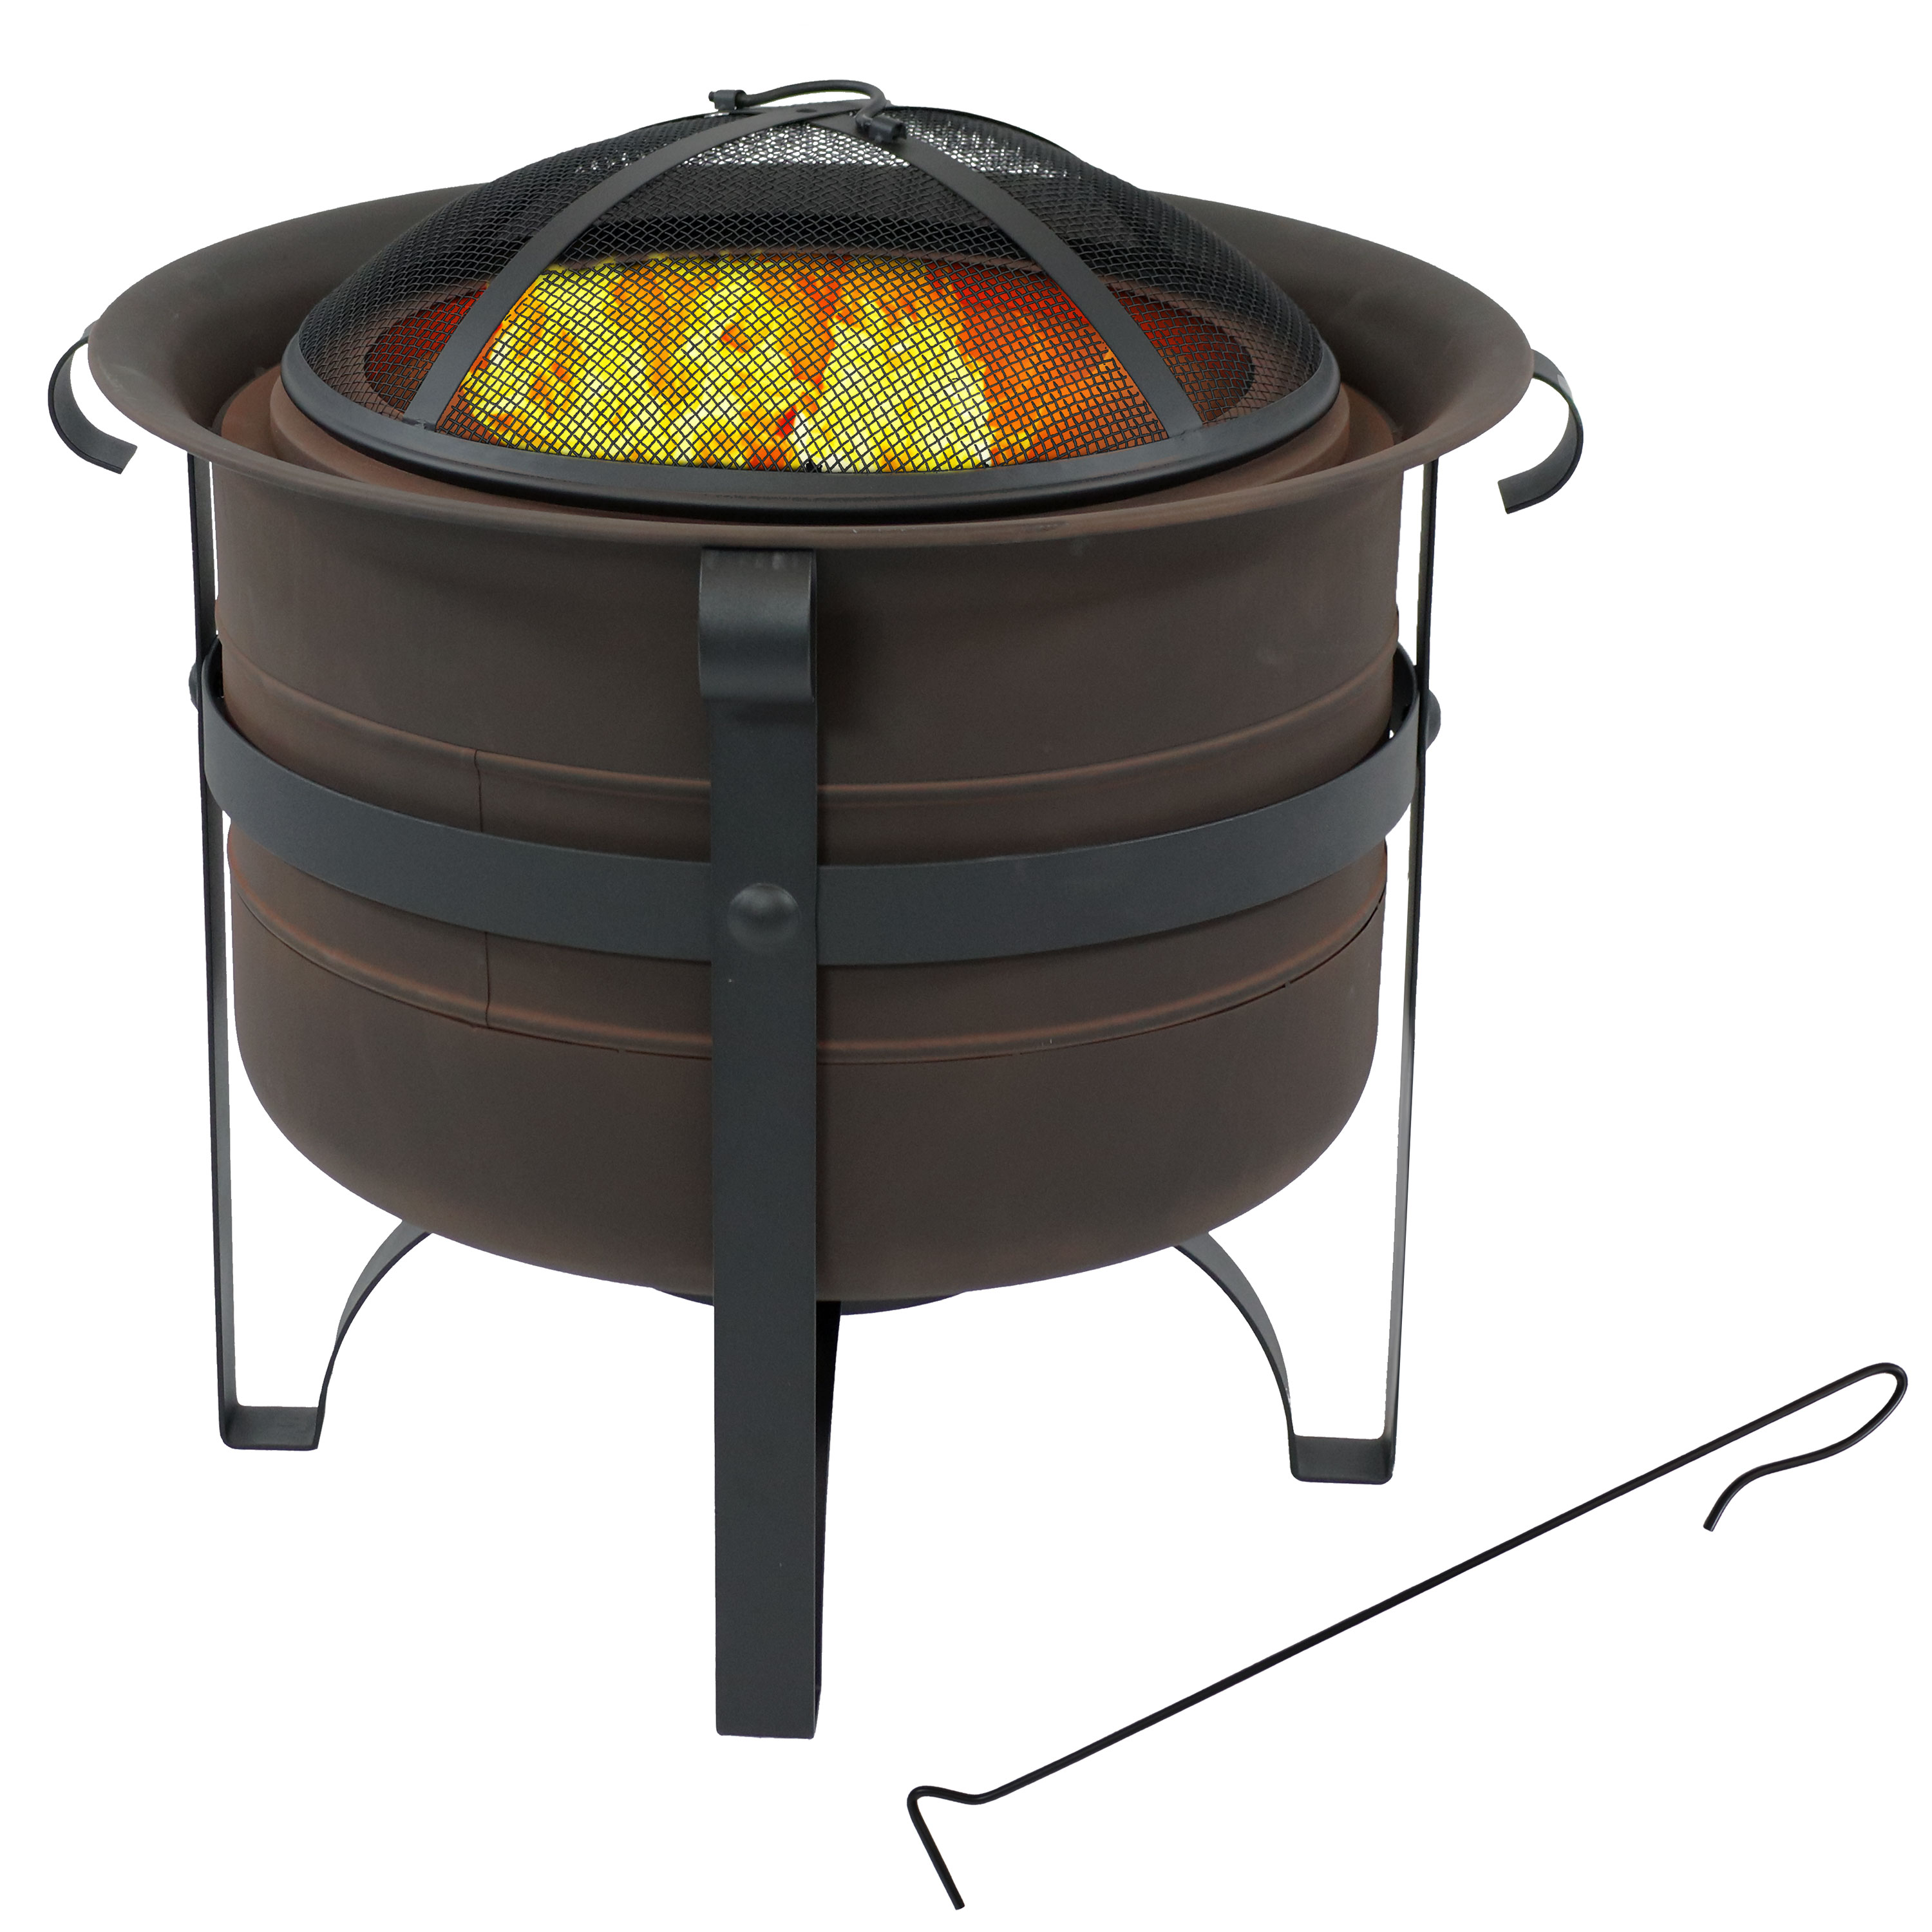 Steel Cauldron-Style Smokeless Fire Pit with Spark Screen